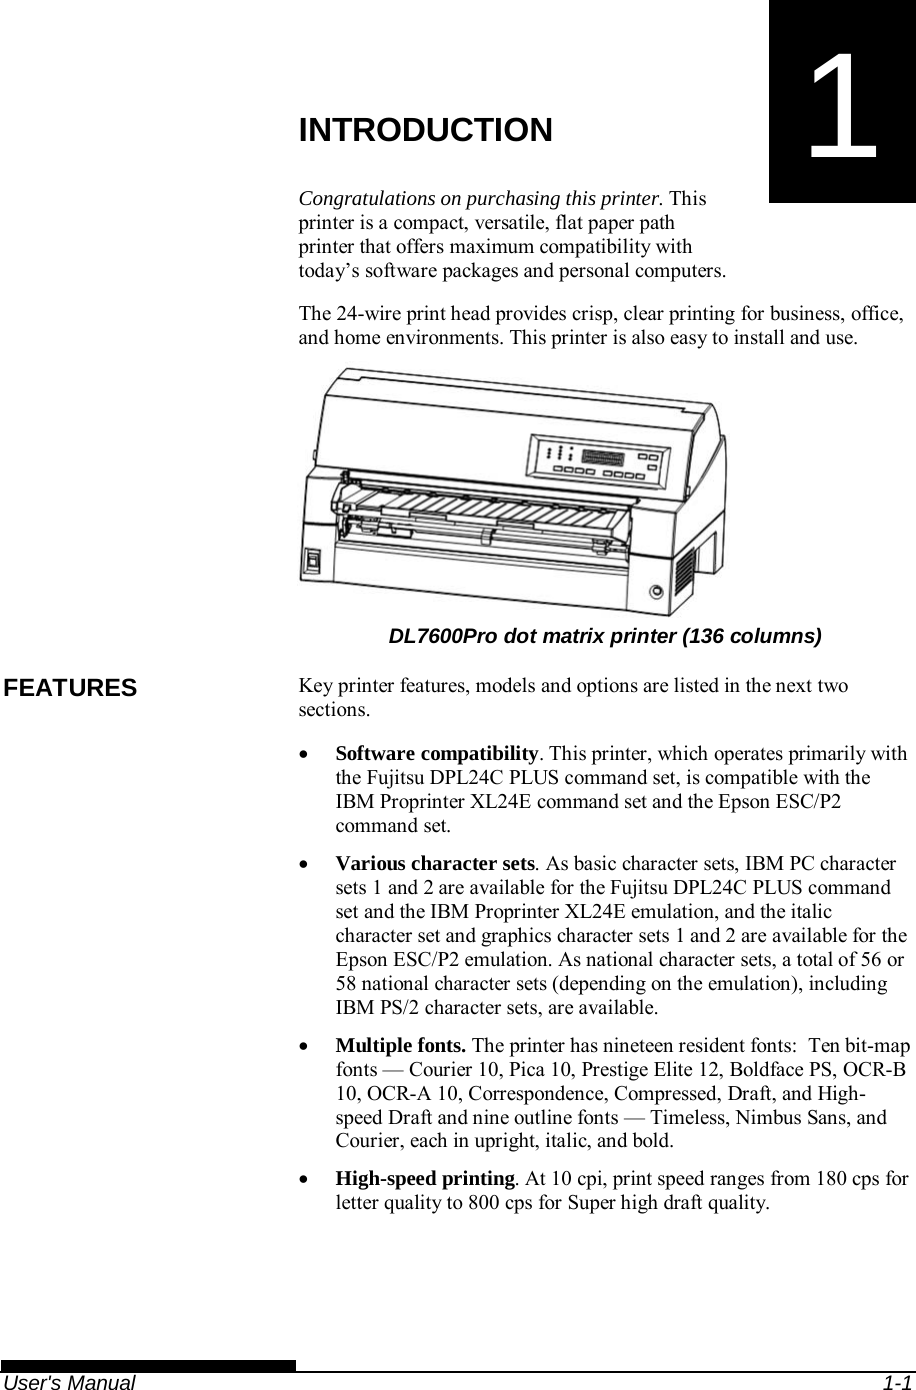   User&apos;s Manual  1-1 1  CHAPTER 1  INTRODUCTION INTRODUCTION Congratulations on purchasing this printer. This printer is a compact, versatile, flat paper path printer that offers maximum compatibility with today’s software packages and personal computers. The 24-wire print head provides crisp, clear printing for business, office, and home environments. This printer is also easy to install and use.       DL7600Pro dot matrix printer (136 columns) Key printer features, models and options are listed in the next two sections.  Software compatibility. This printer, which operates primarily with the Fujitsu DPL24C PLUS command set, is compatible with the IBM Proprinter XL24E command set and the Epson ESC/P2 command set.  Various character sets. As basic character sets, IBM PC character sets 1 and 2 are available for the Fujitsu DPL24C PLUS command set and the IBM Proprinter XL24E emulation, and the italic character set and graphics character sets 1 and 2 are available for the Epson ESC/P2 emulation. As national character sets, a total of 56 or 58 national character sets (depending on the emulation), including IBM PS/2 character sets, are available.  Multiple fonts. The printer has nineteen resident fonts:  Ten bit-map fonts — Courier 10, Pica 10, Prestige Elite 12, Boldface PS, OCR-B 10, OCR-A 10, Correspondence, Compressed, Draft, and High-speed Draft and nine outline fonts — Timeless, Nimbus Sans, and Courier, each in upright, italic, and bold.  High-speed printing. At 10 cpi, print speed ranges from 180 cps for letter quality to 800 cps for Super high draft quality. FEATURES 